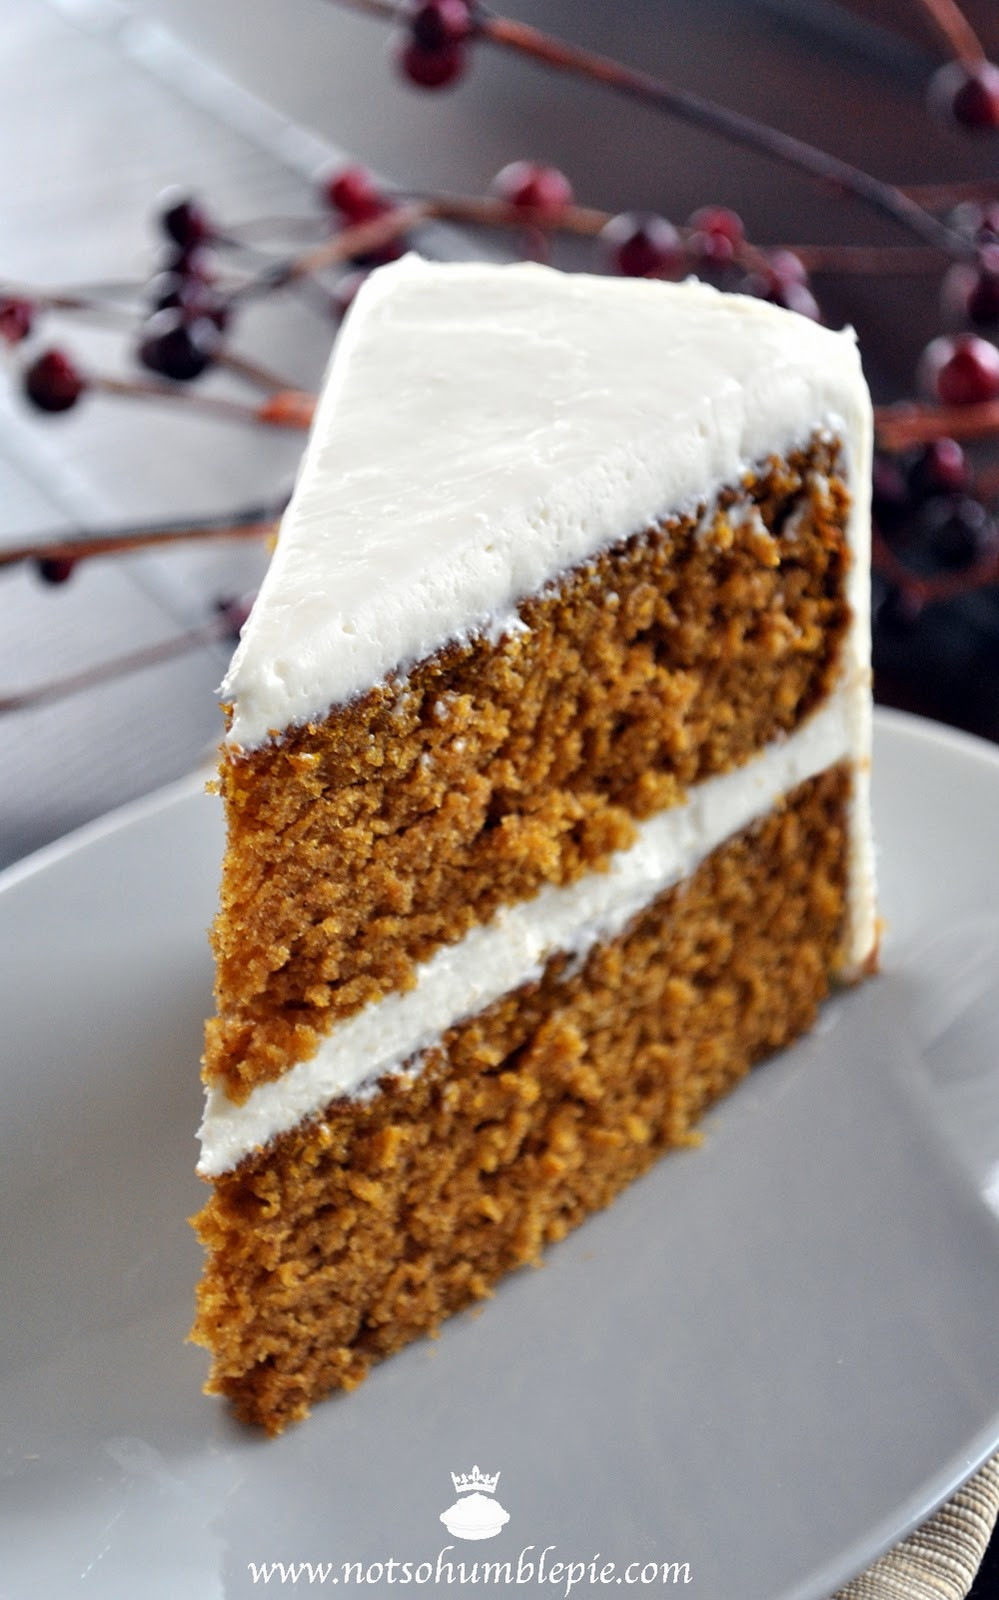 Spice Cake Recipe With Cream Cheese Frosting
 Not So Humble Pie Pumpkin Spice Cake with Whipped Cream